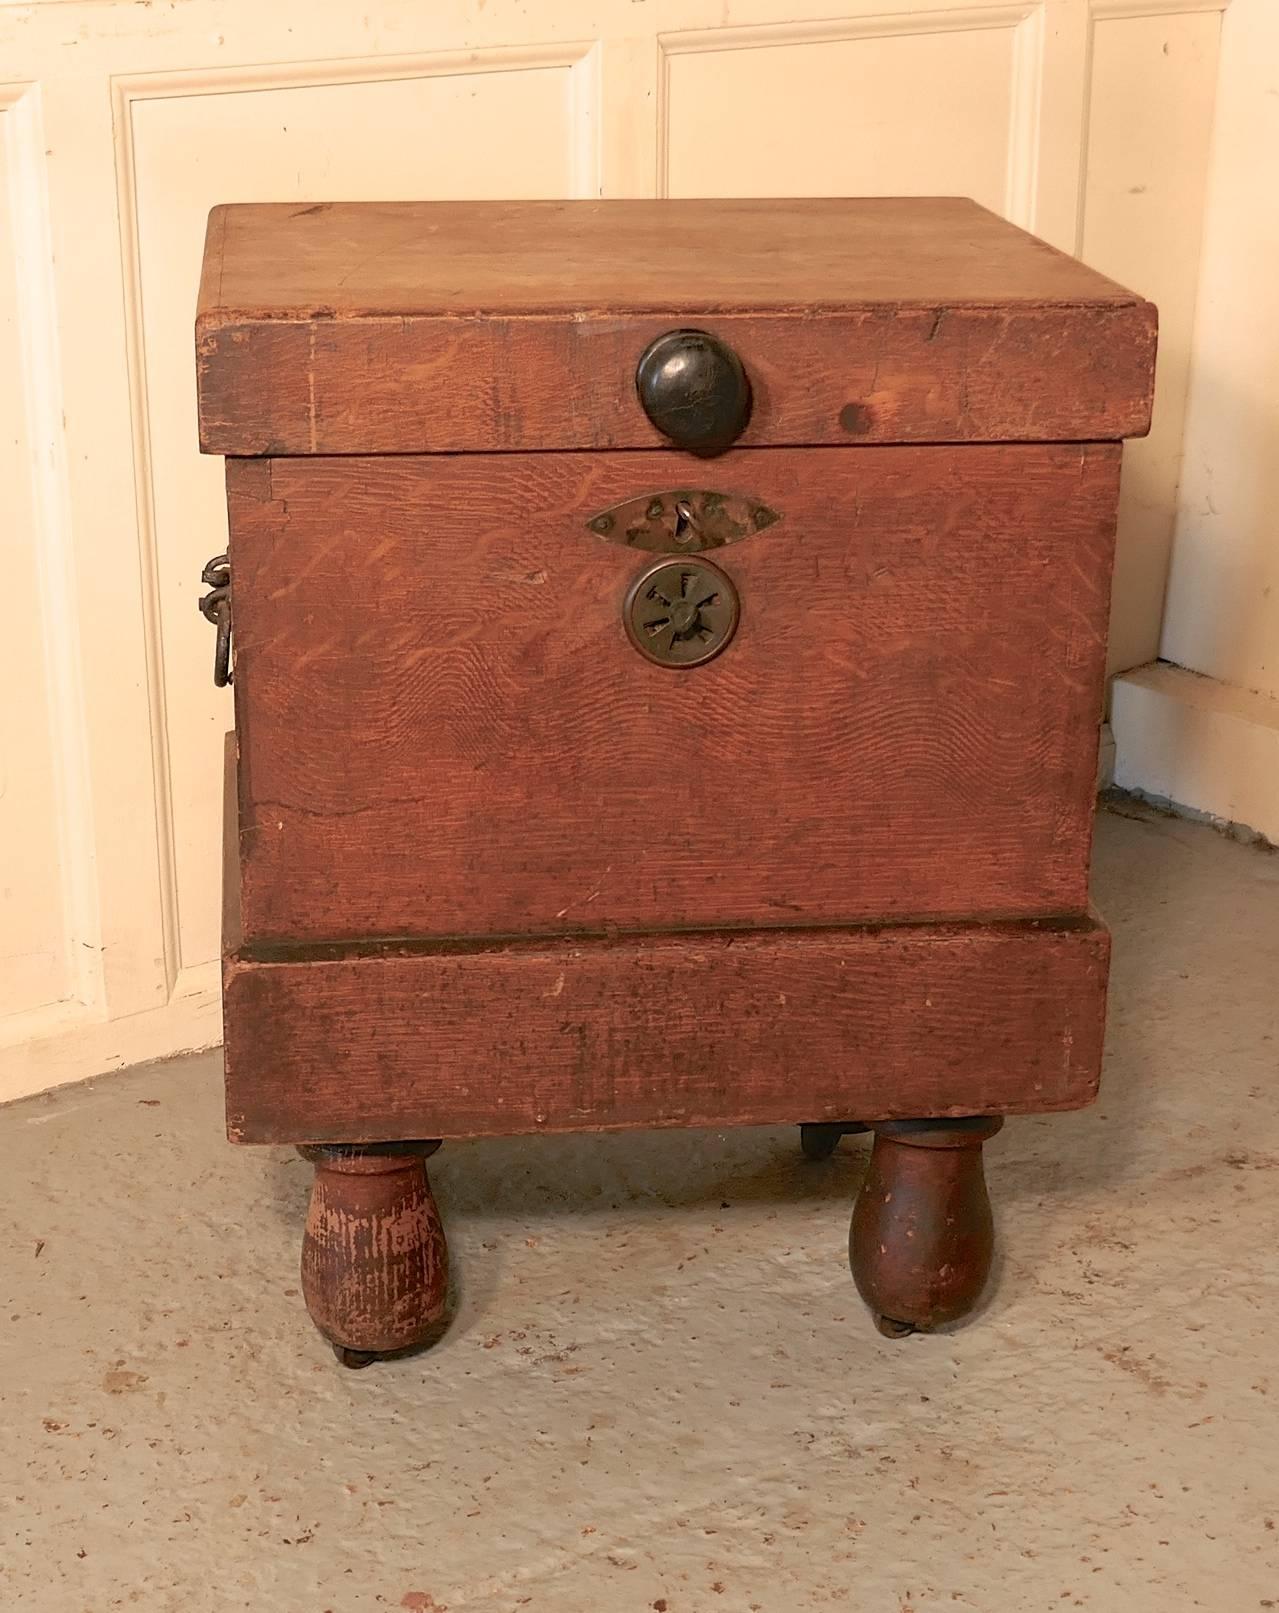 Rustic Country House Pine Ice Box or Refrigerator from around 1890